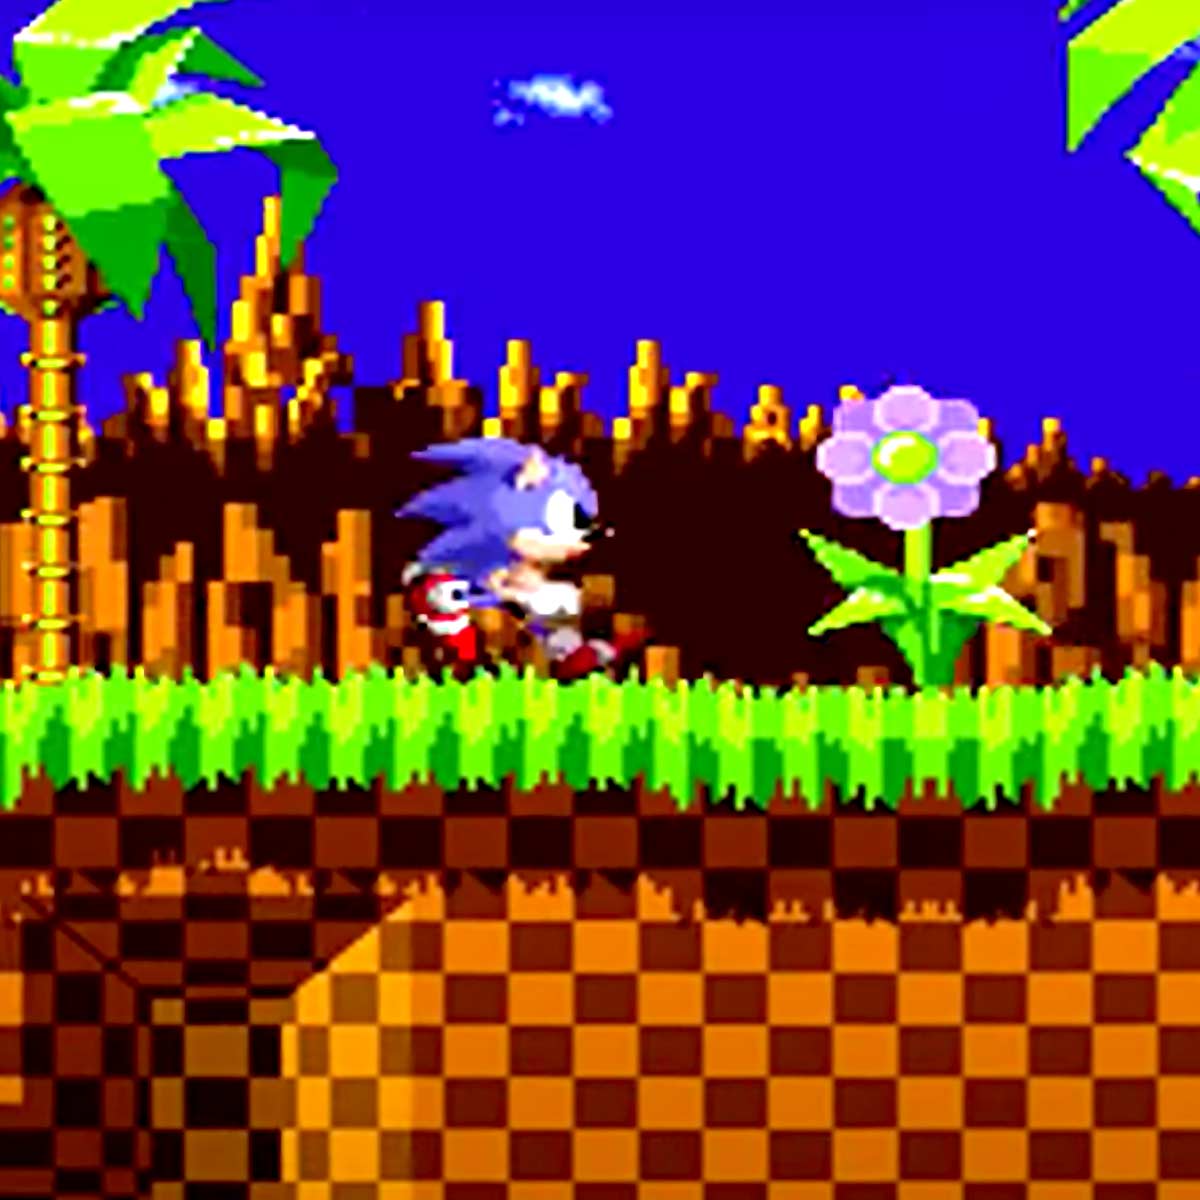 Sonic the Hedgehog - Green Hill Zone   - Lead Sheets for  Video Game Music